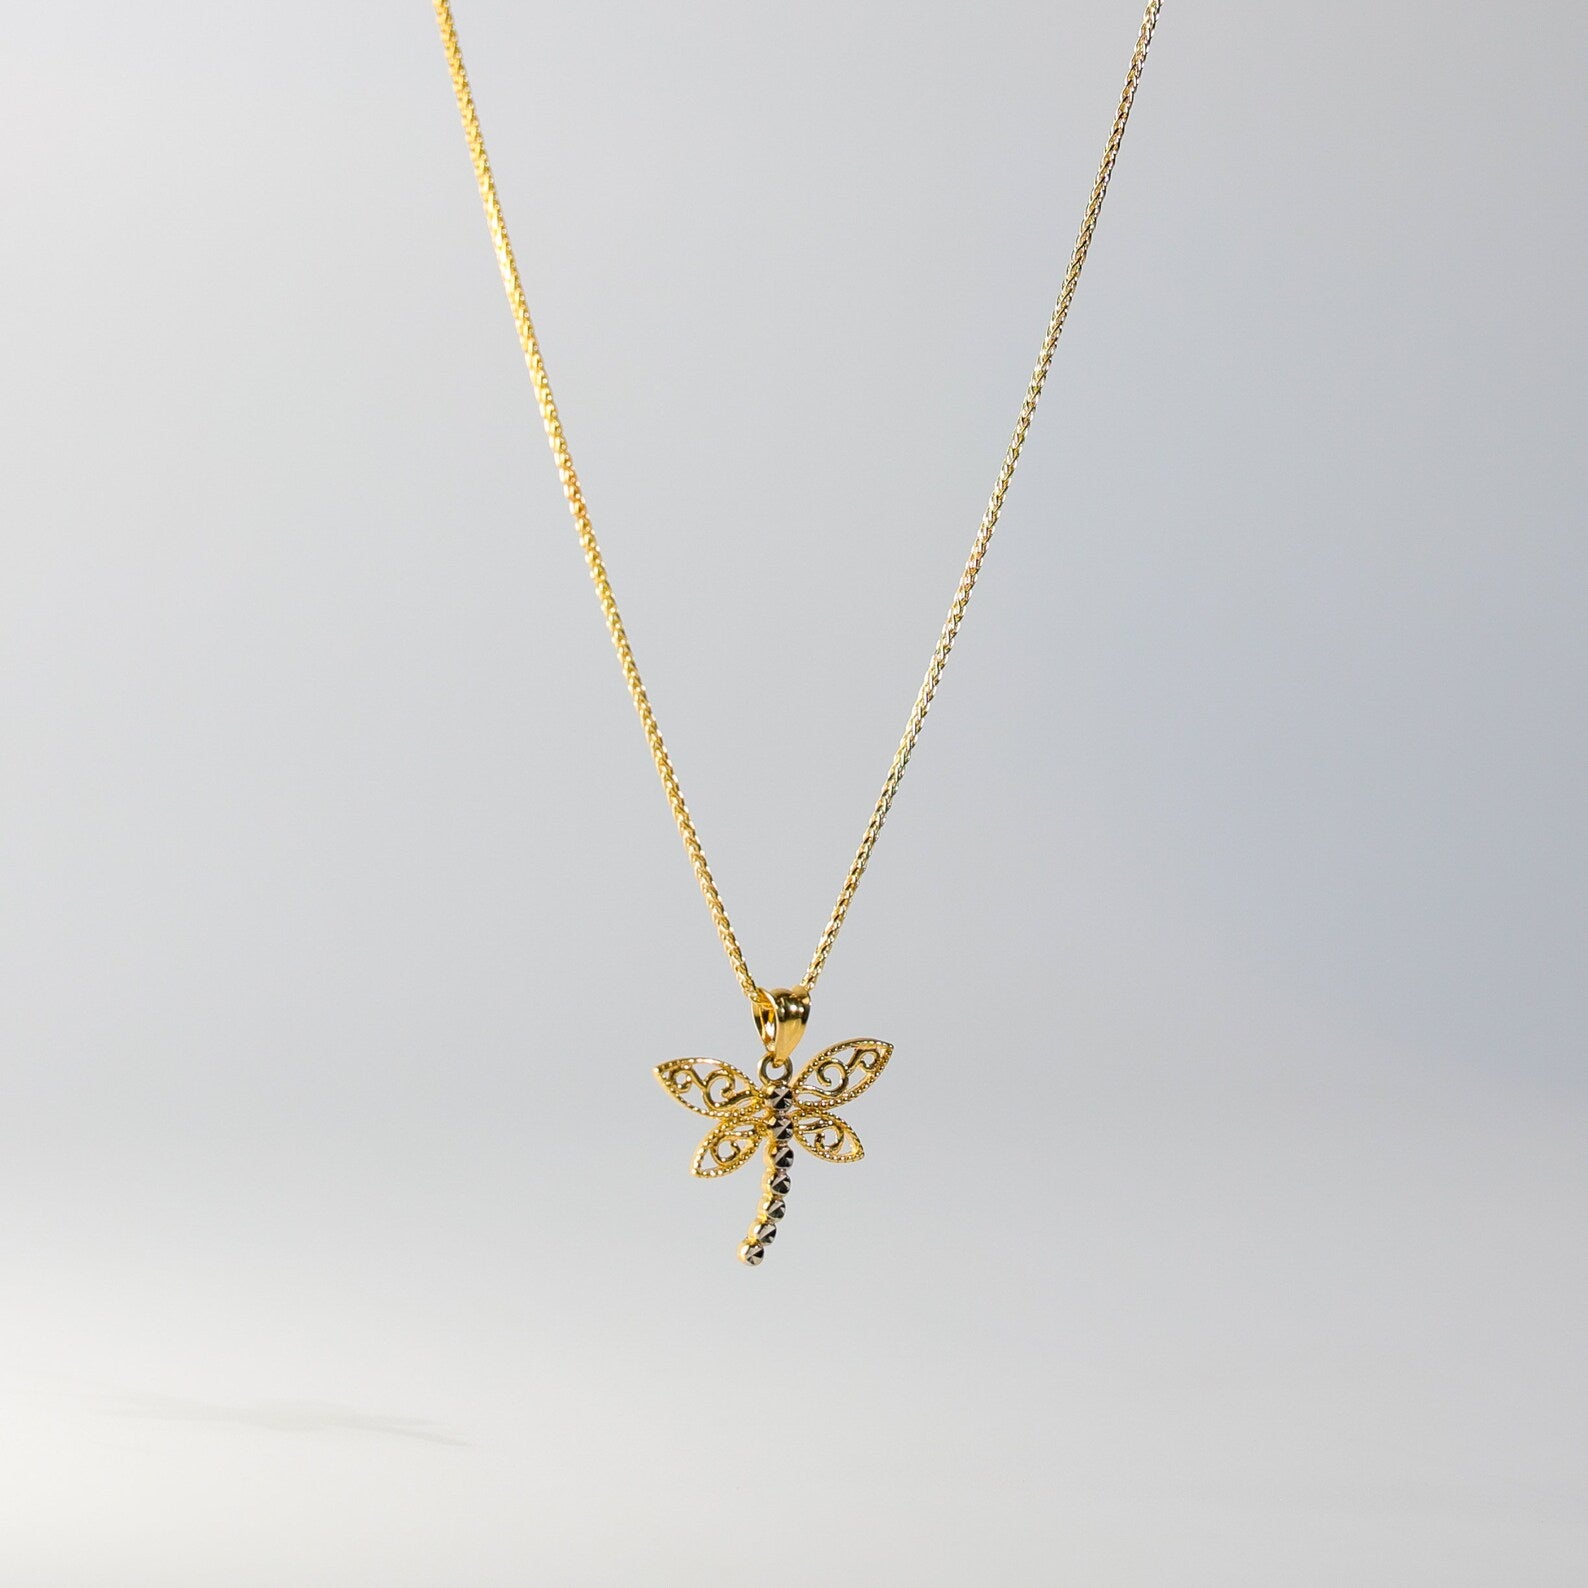 Gold Dragonfly Pendant Model-2359 - Charlie & Co. Jewelry